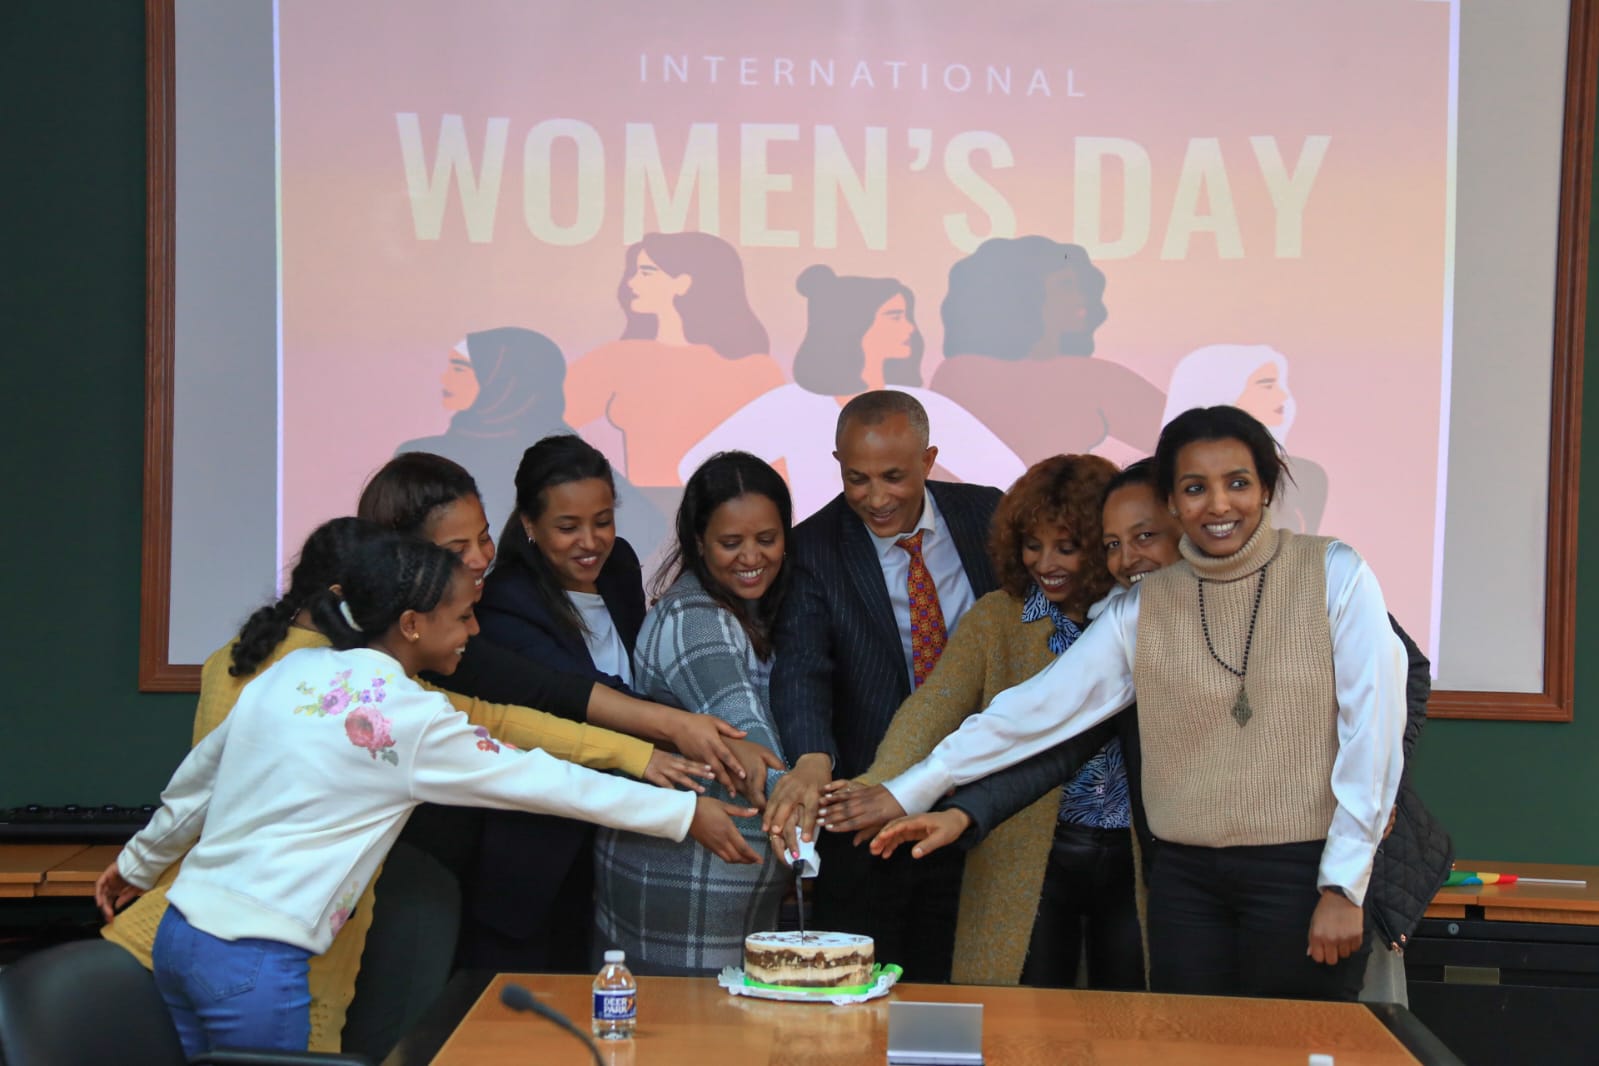 Embassy of Ethiopia in Washington D.C celebrate the annual International Women’s Day